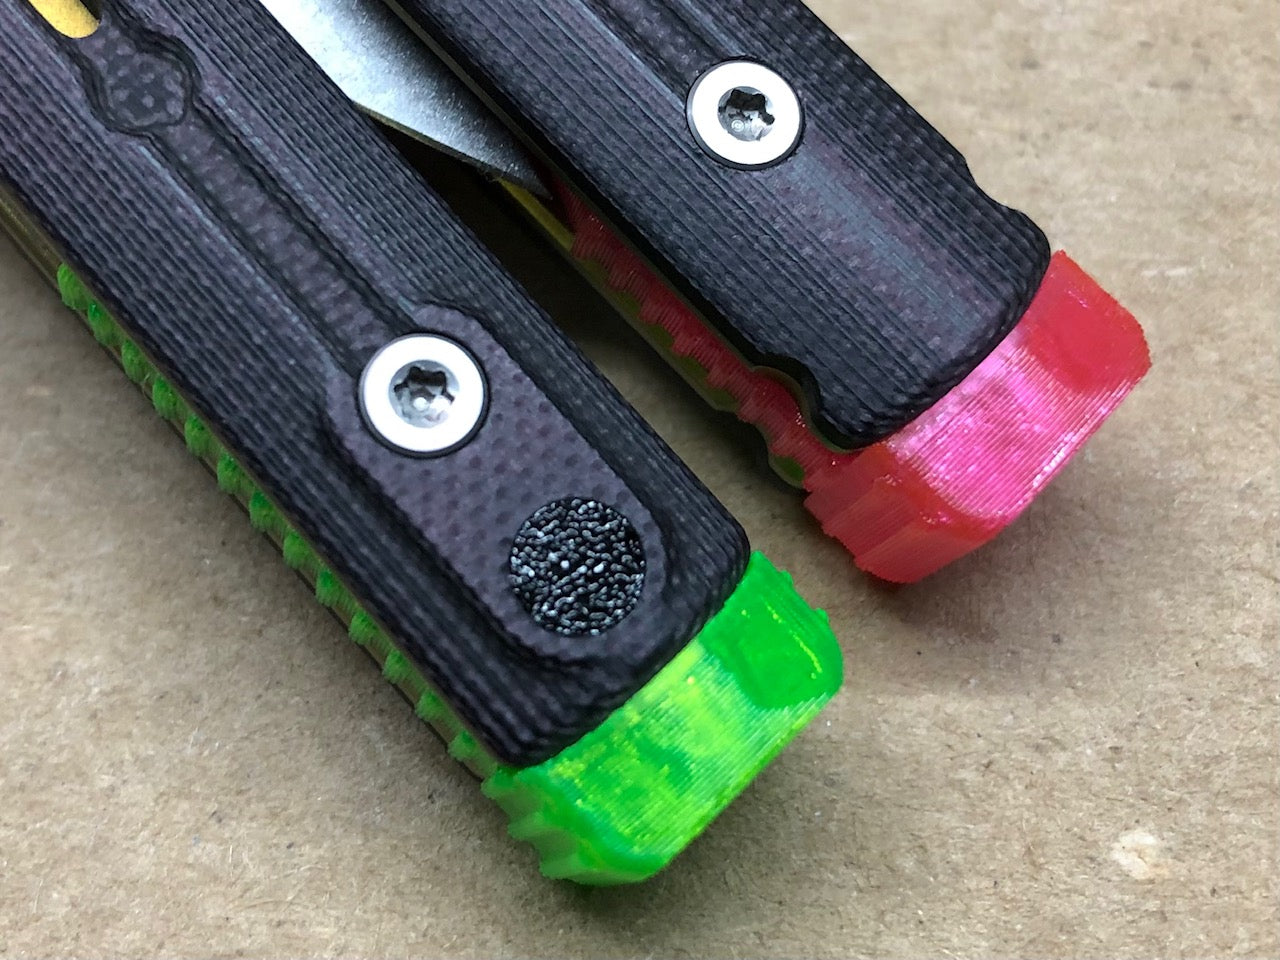 Pivot Plugs are a cosmetic handle inlay mod designed to friction fit into 3/16" bores at the bottom of a variety of balisong handles, including the Squid Industries Krake Raken balisong, the MachineWise Prysma, SliftT, and the Nabalis Vulp Pro. Maxace Serpent Striker v3 balisong.